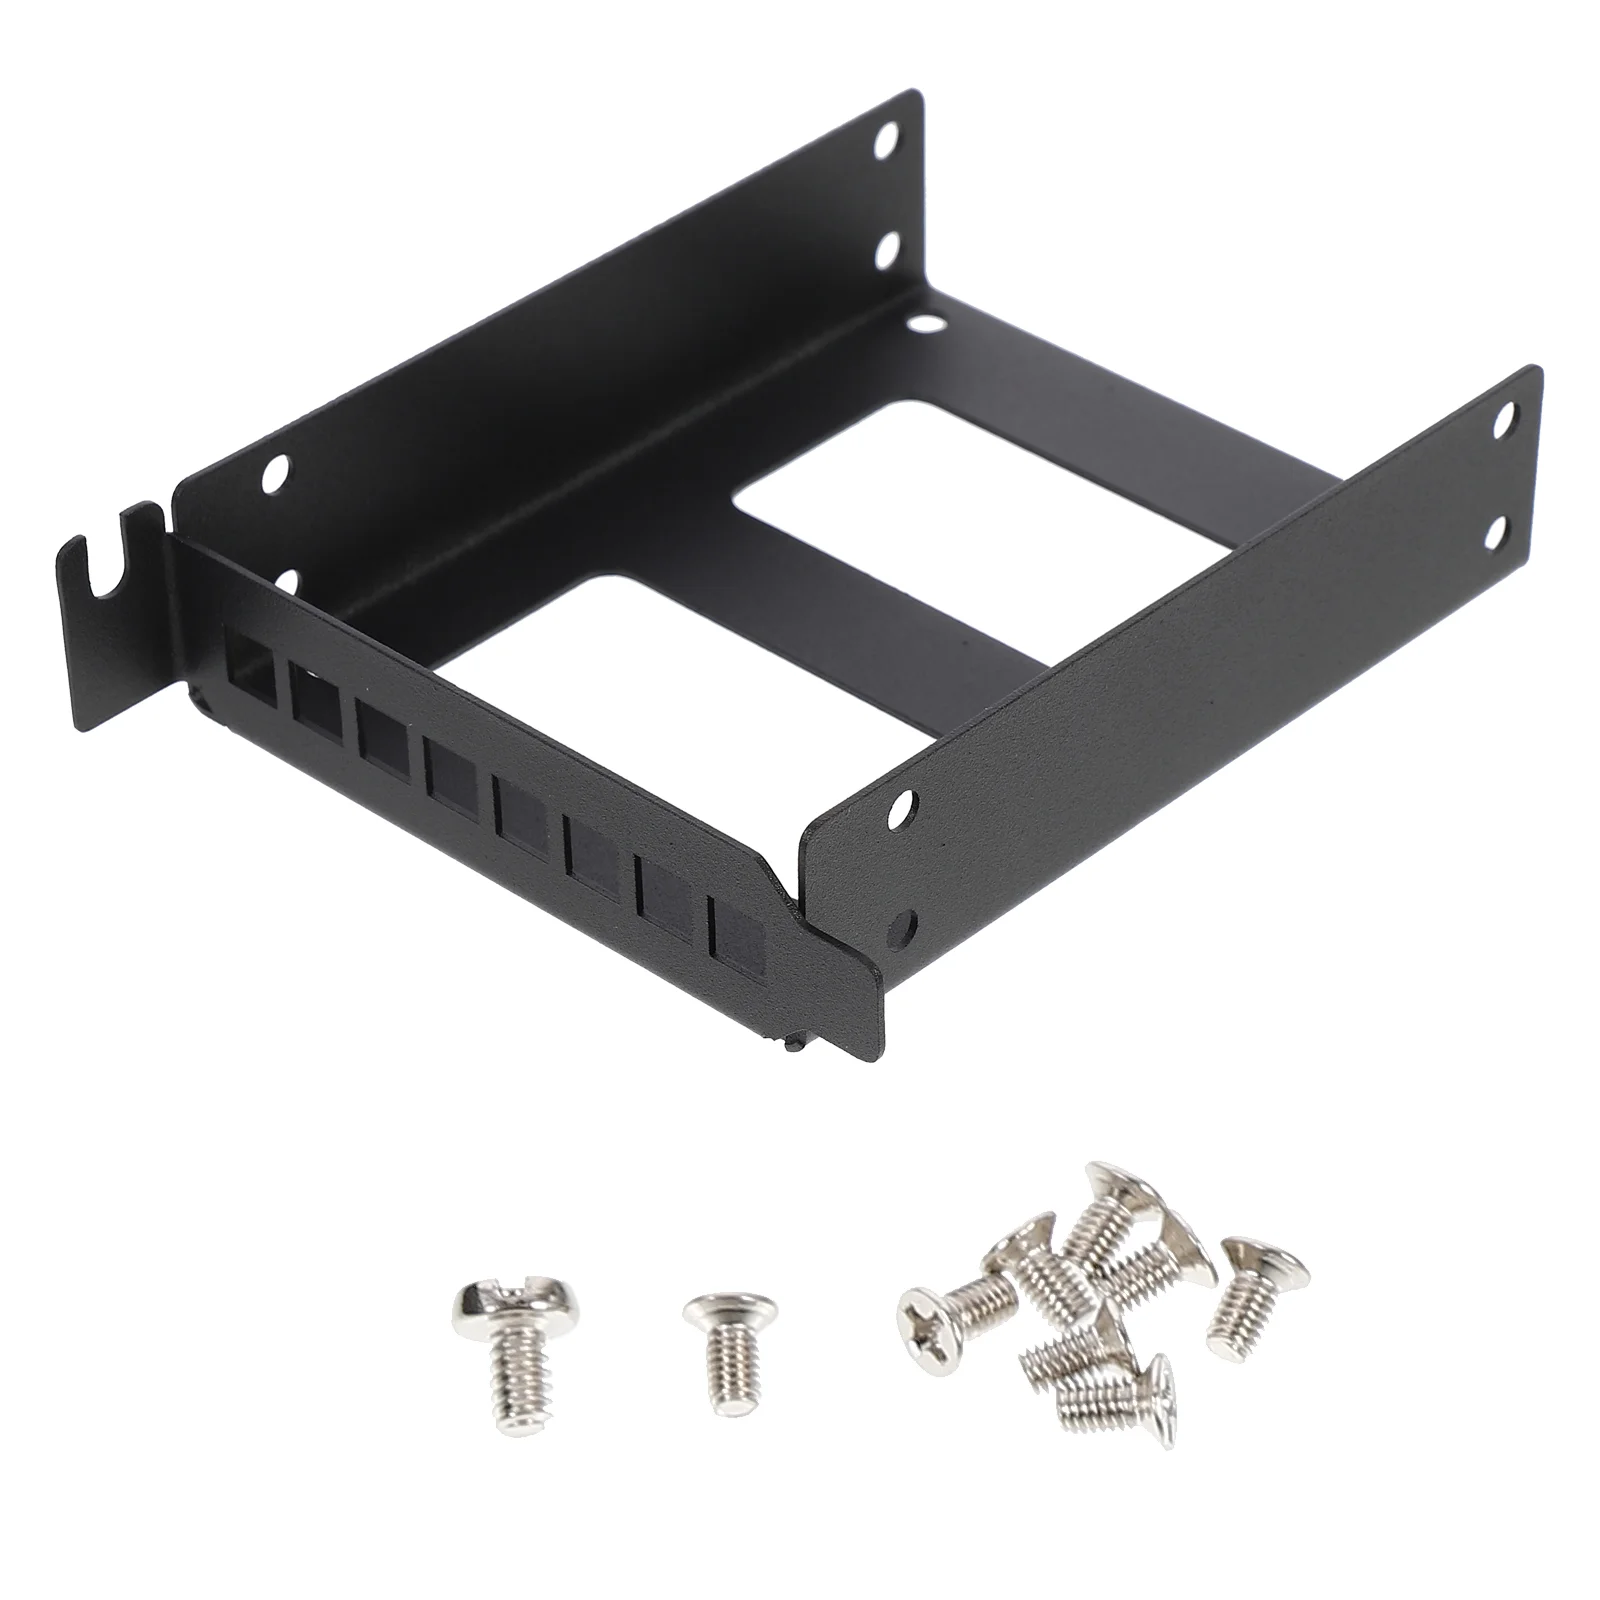 

1 PC PCI Slot Expansion Rear Bracket Hard Disk Adapter Hard Drive Caddy Tray SSD HDD 2.5 inch Disk Bay